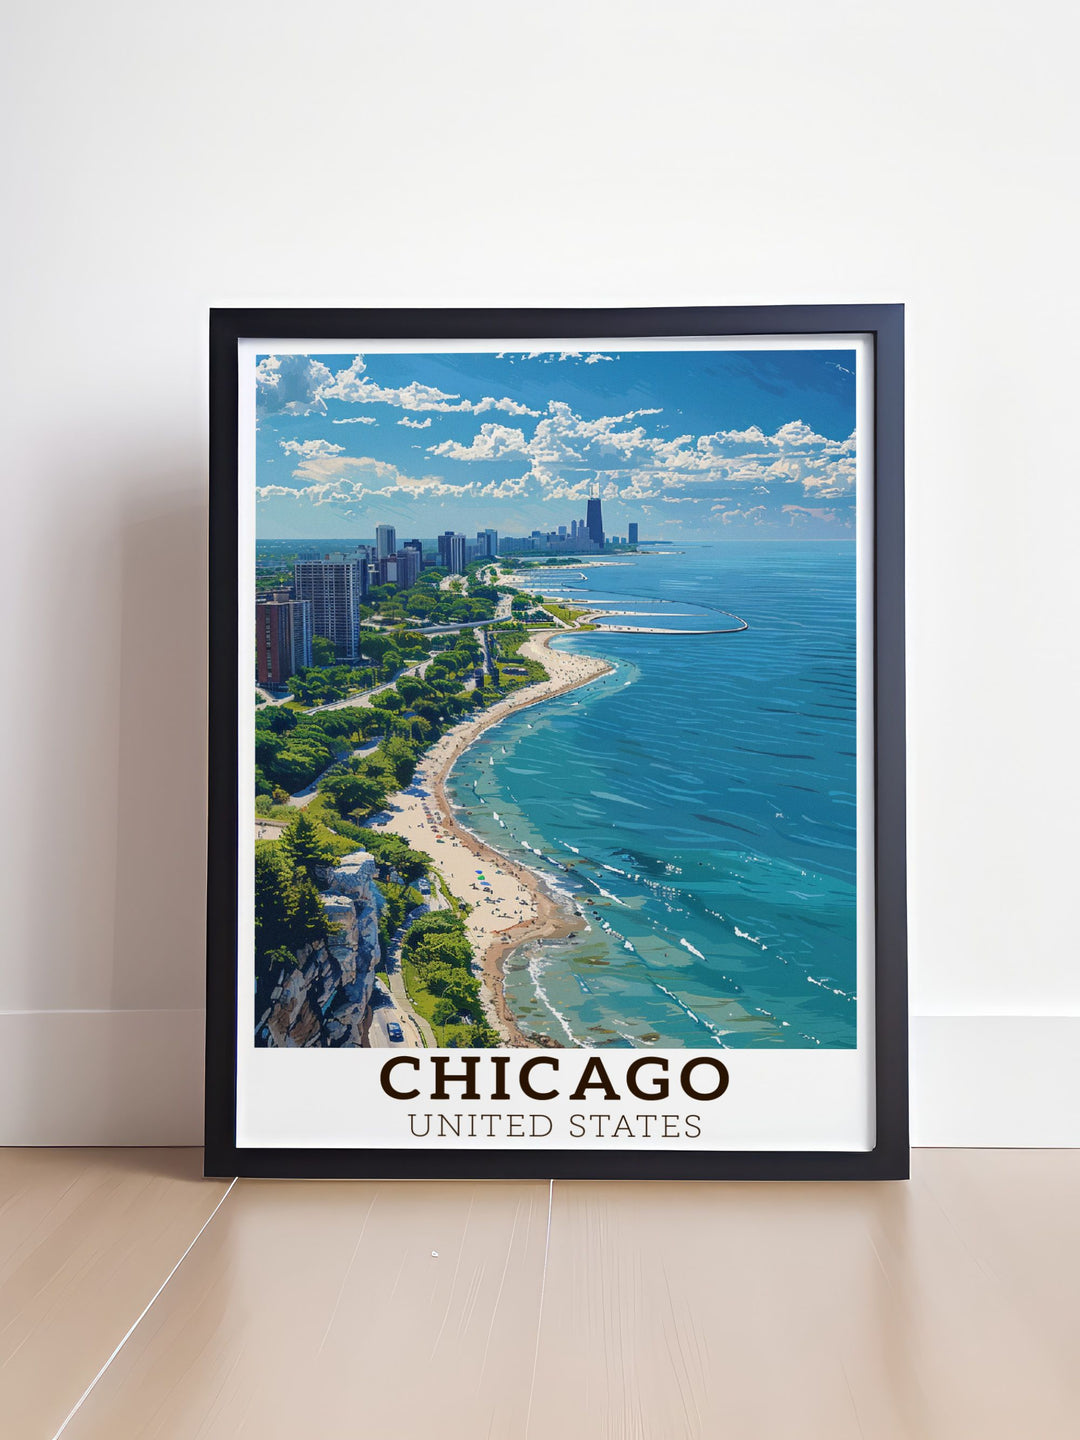 Chicago city map and Lake Michigan prints combine modern city vibes with natural beauty making this digital download a must have for lovers of Chicago photography and decor.